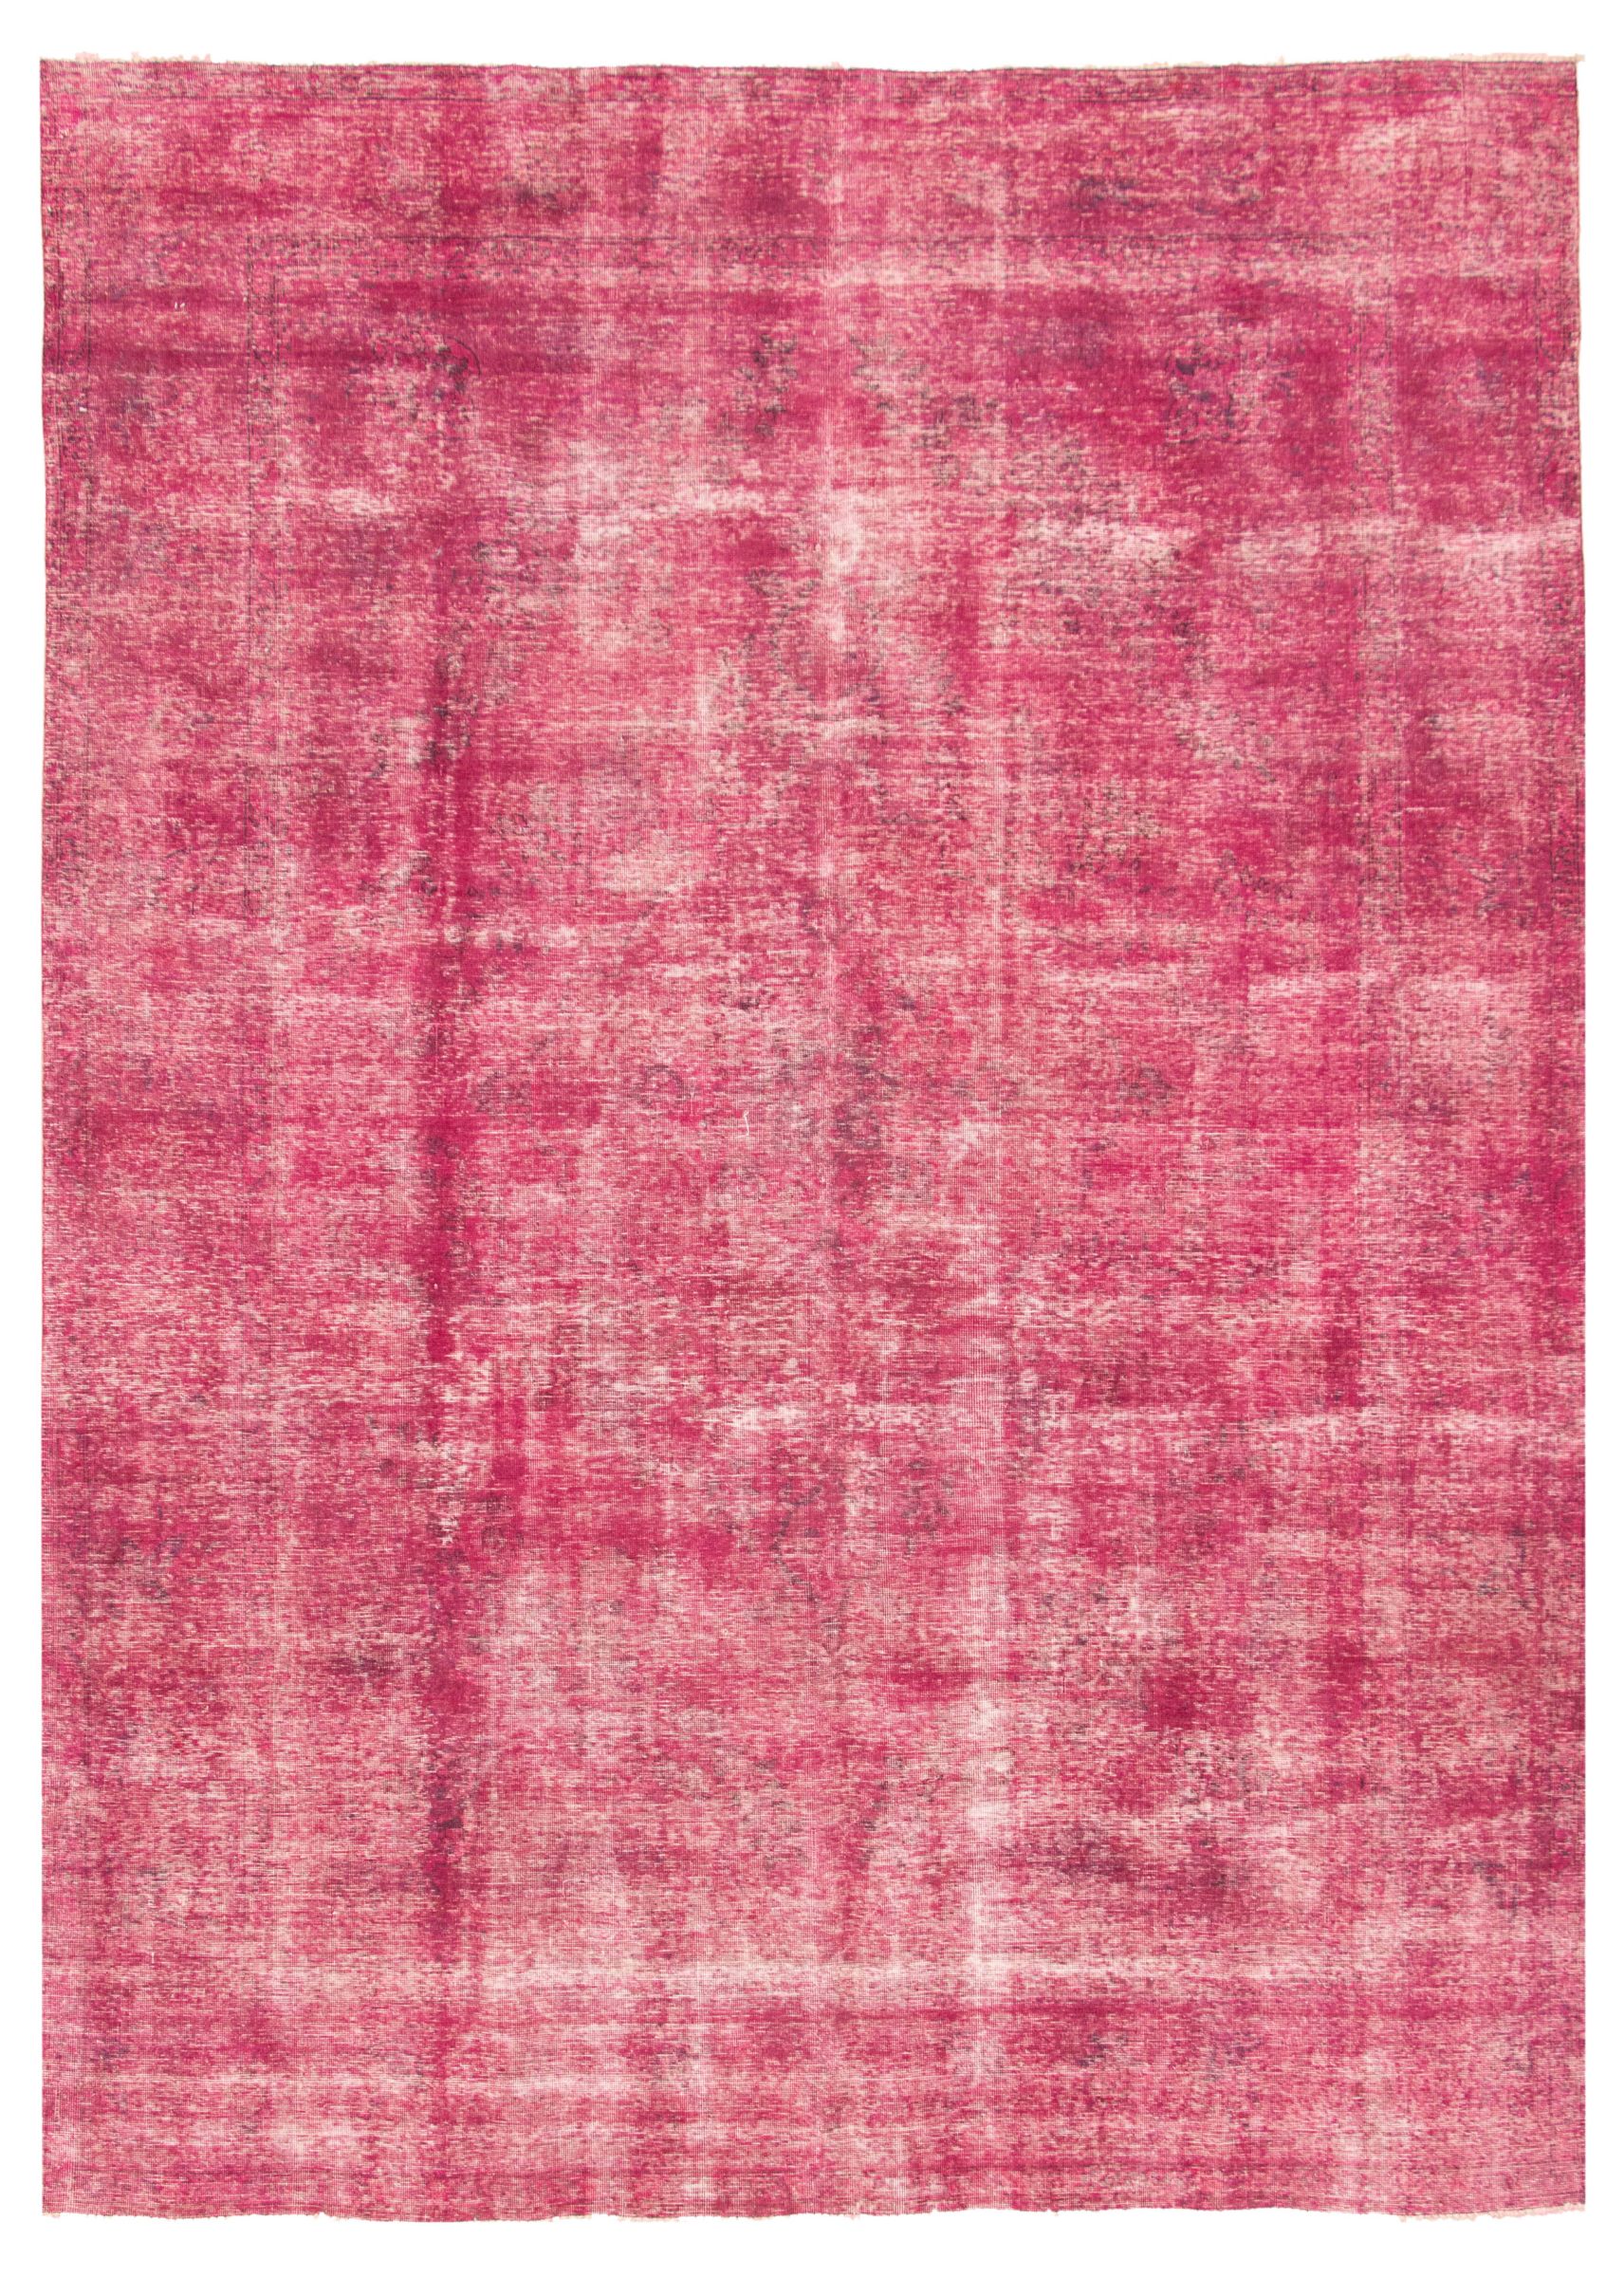 Hand-knotted Color Transition Dark Pink Wool Rug 9'2" x 12'7" Size: 9'2" x 12'7"  